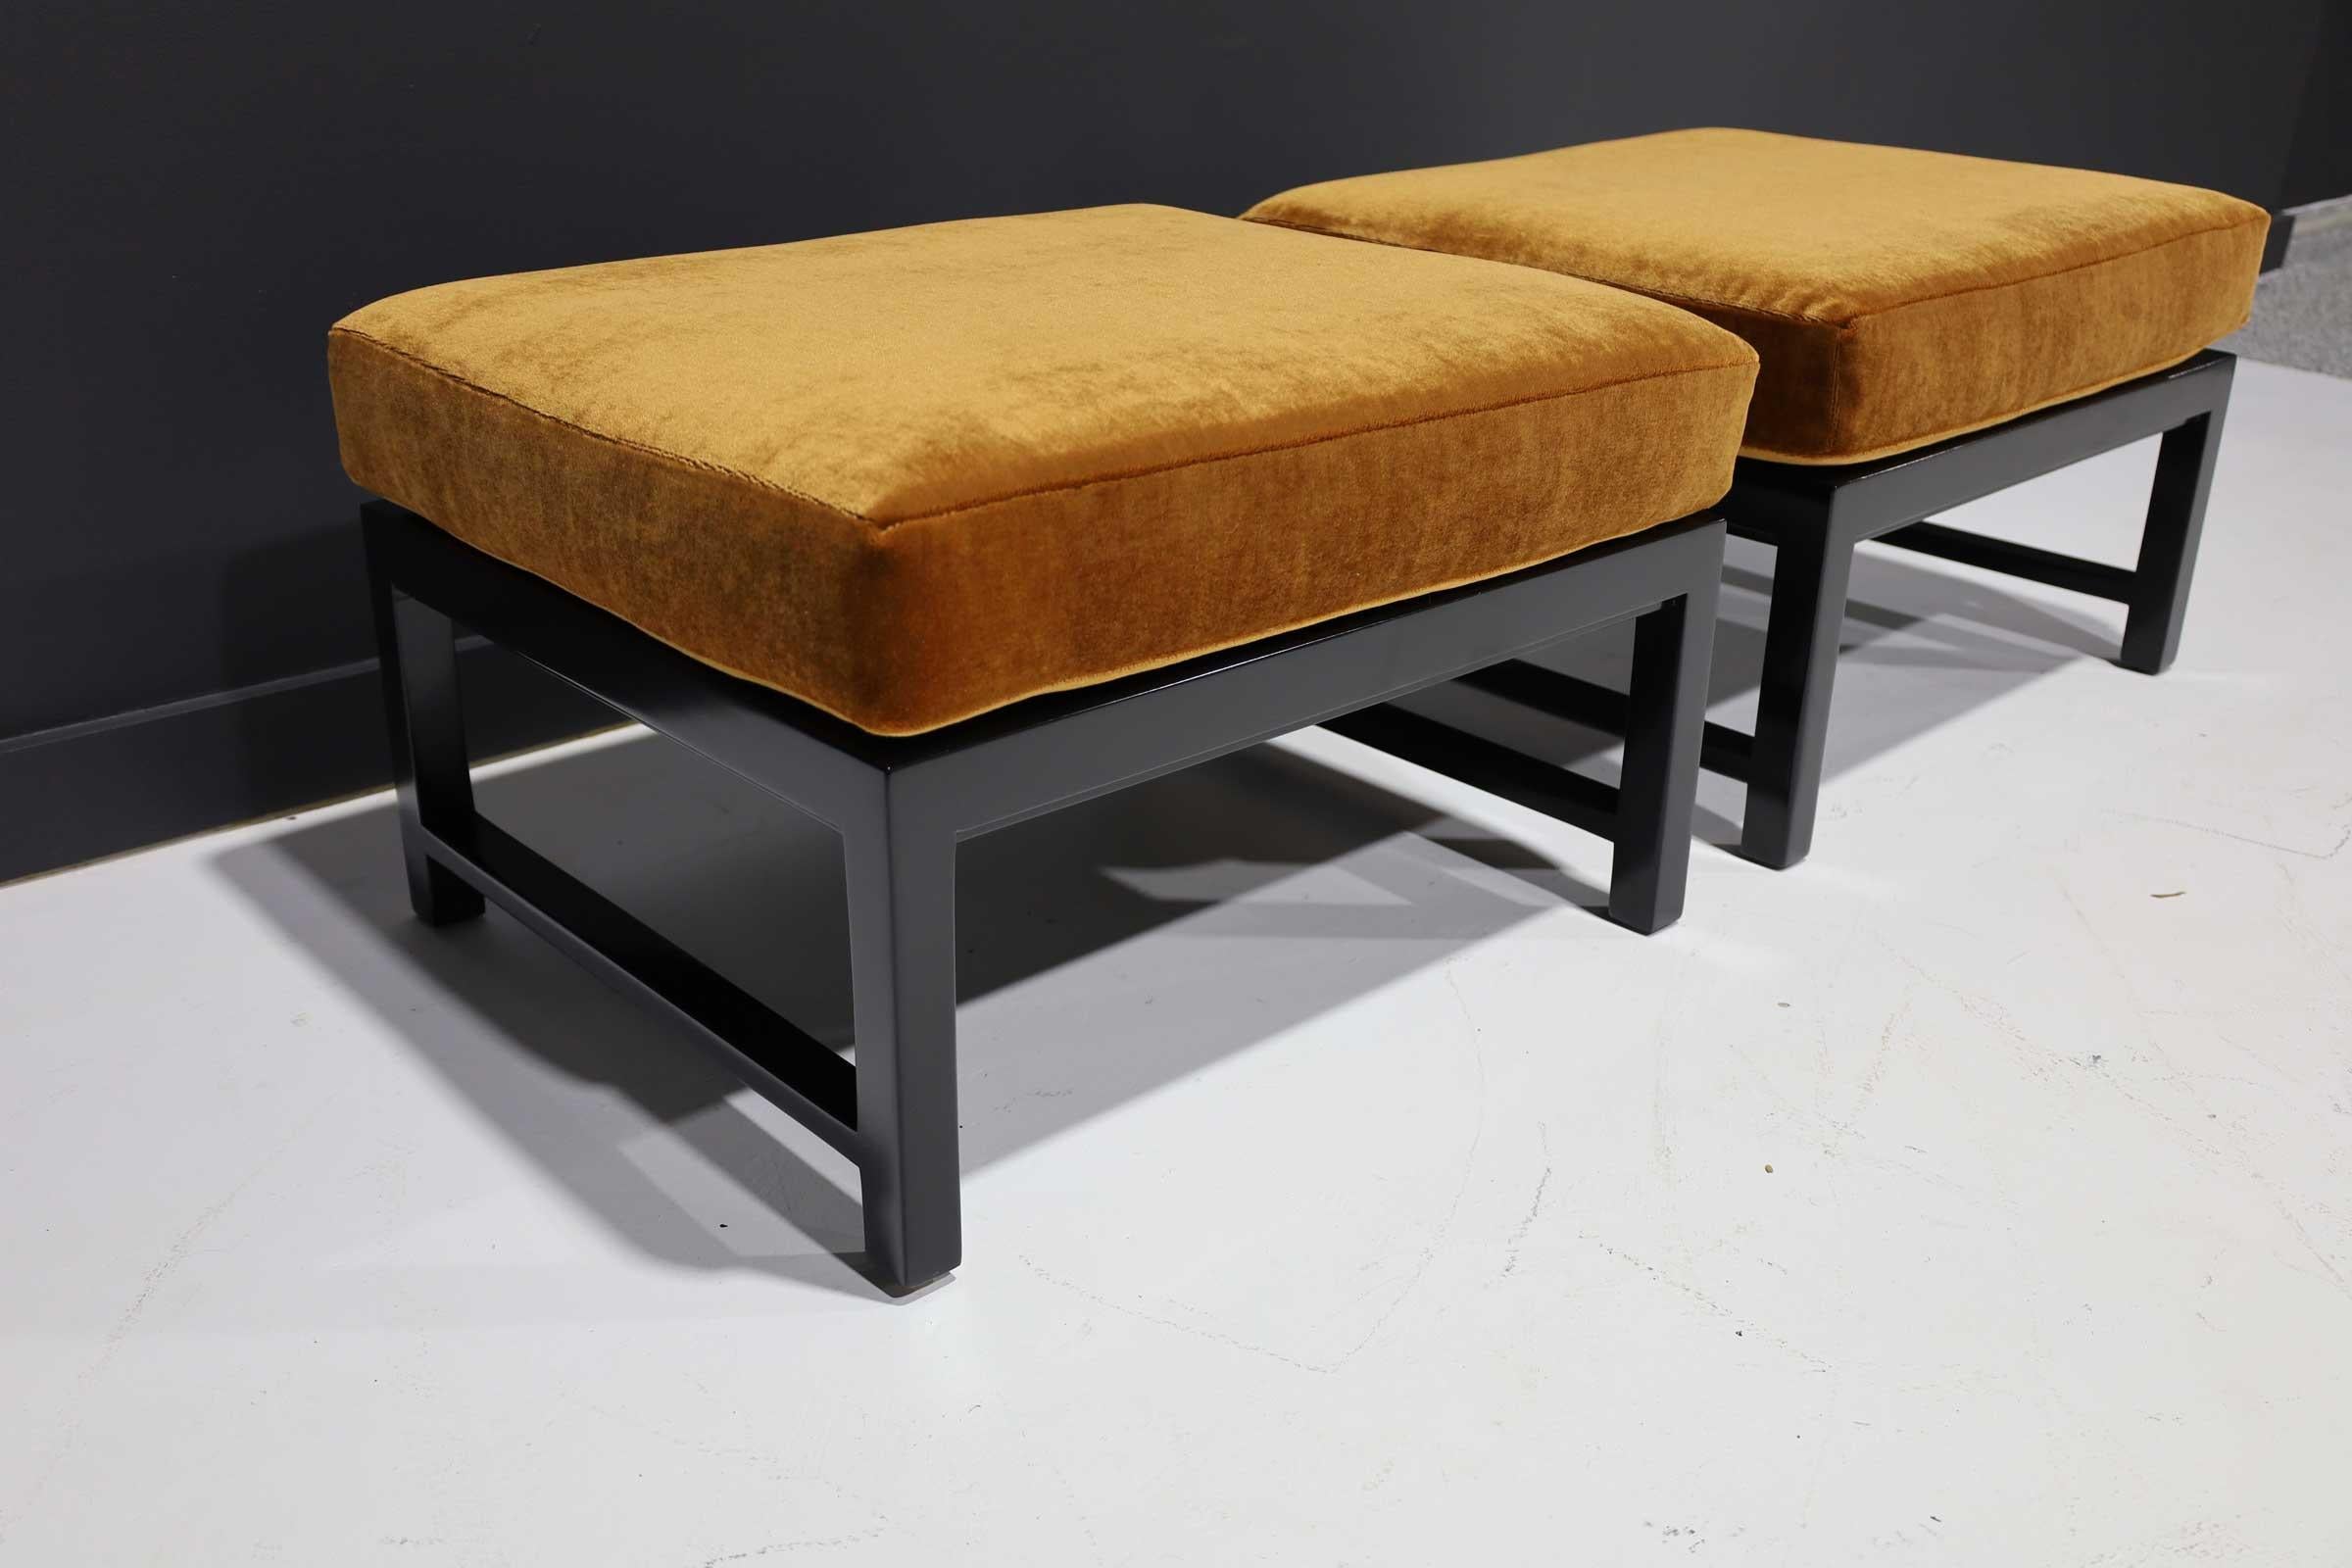 Pair of Dunbar Stools or Ottomans in Nutmeg/Rust Mohair In Good Condition For Sale In Dallas, TX